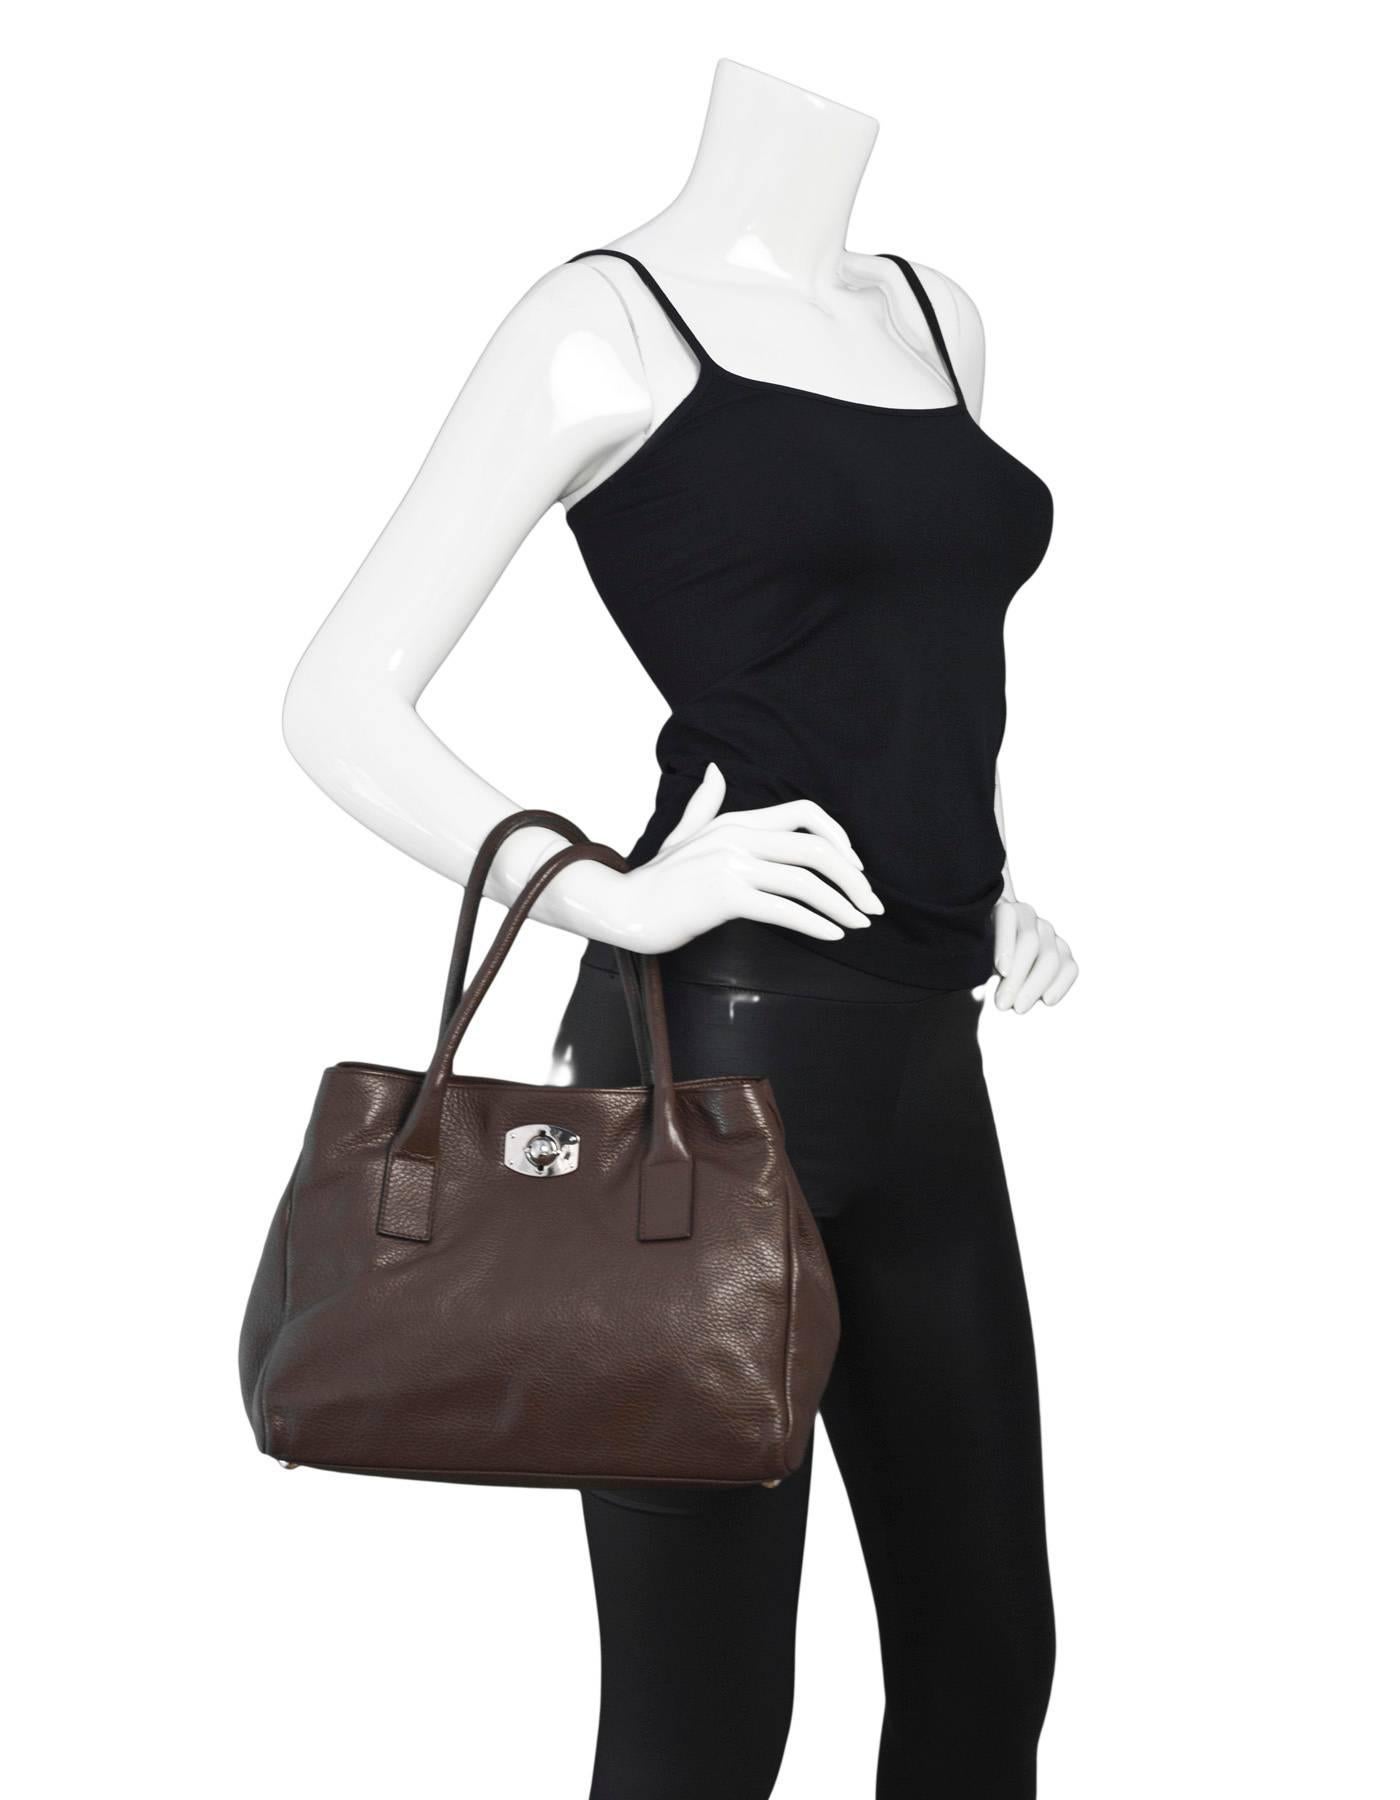 Furla Brown Leather Tote

Made In: Tunisia
Color: Brown
Hardware: Silvertone
Materials: Leather, metal
Lining: Brown textile
Closure/Opening: Front twist lock
Exterior Pockets: None
Interior Pockets: One zip pocket
Overall Condition: Excellent